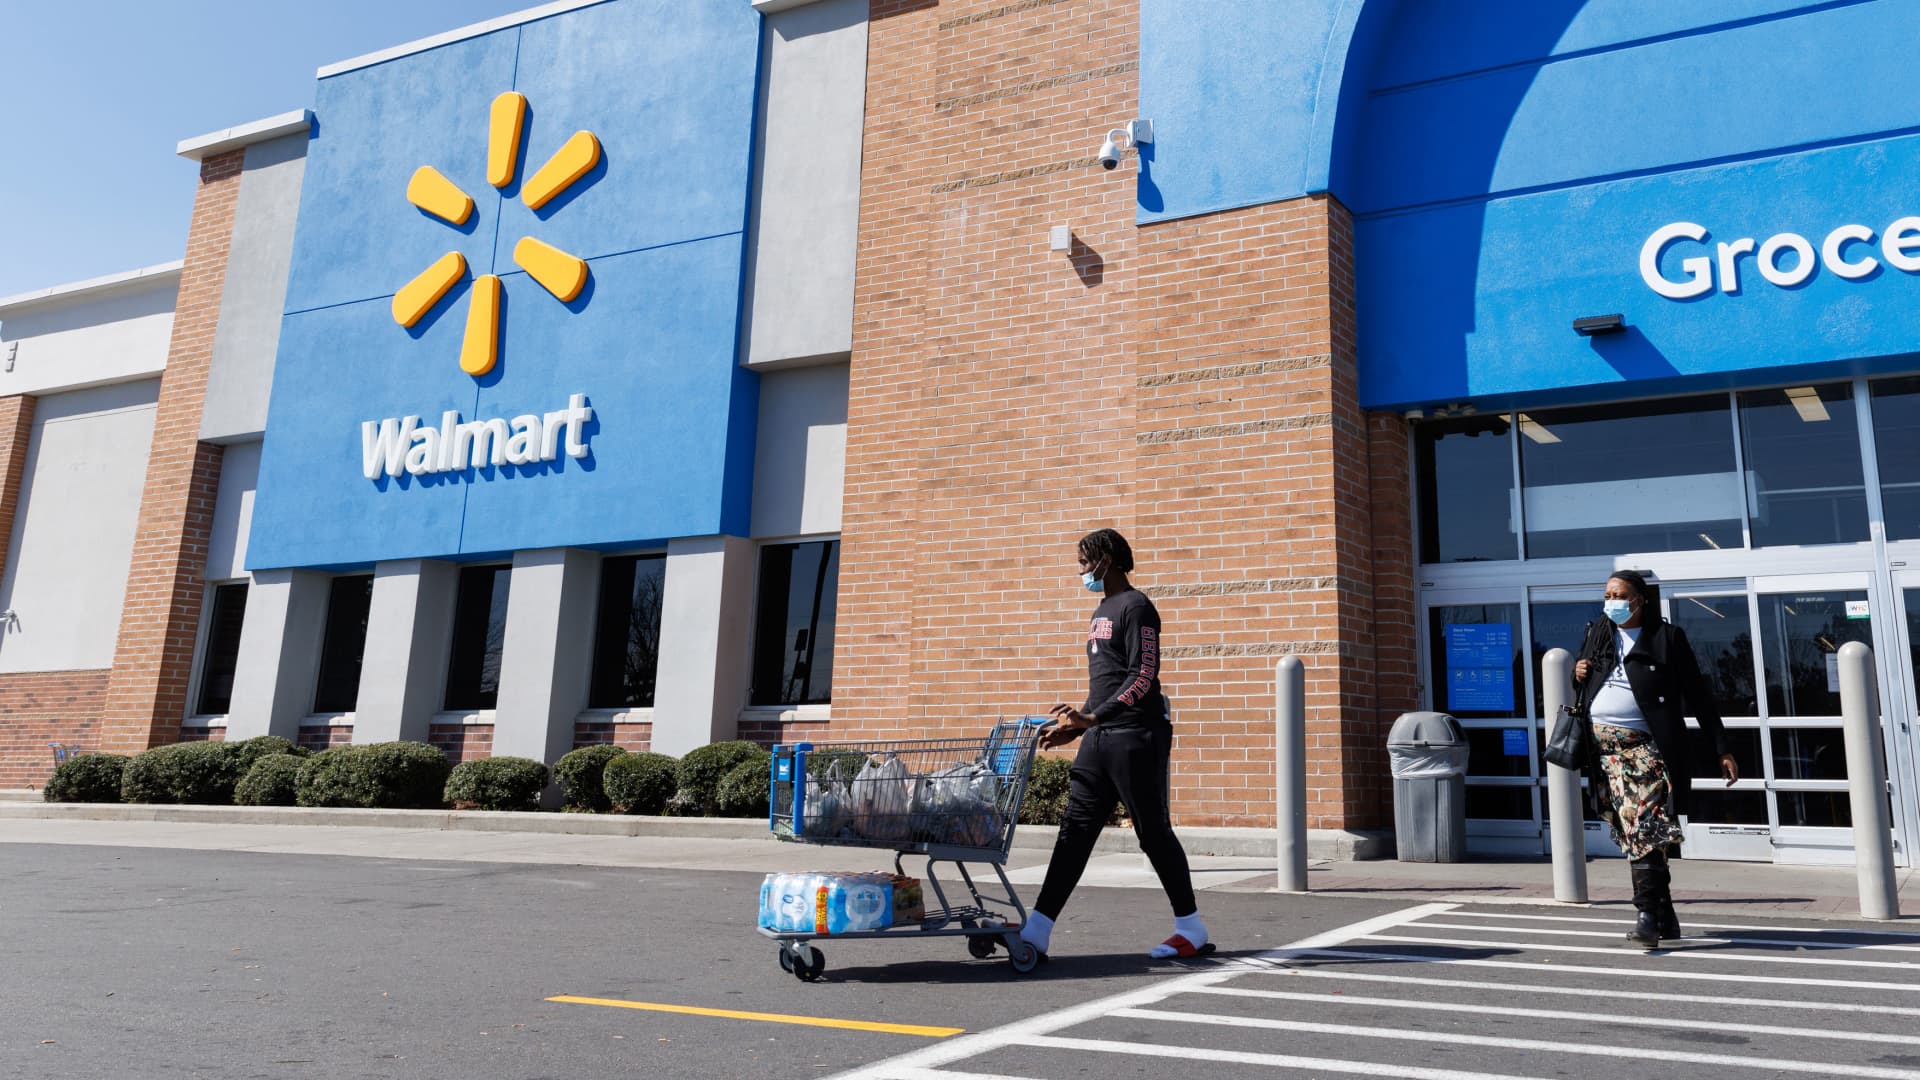 Walmart raises full-year guidance, as earnings beat on boost from grocery and online businesses